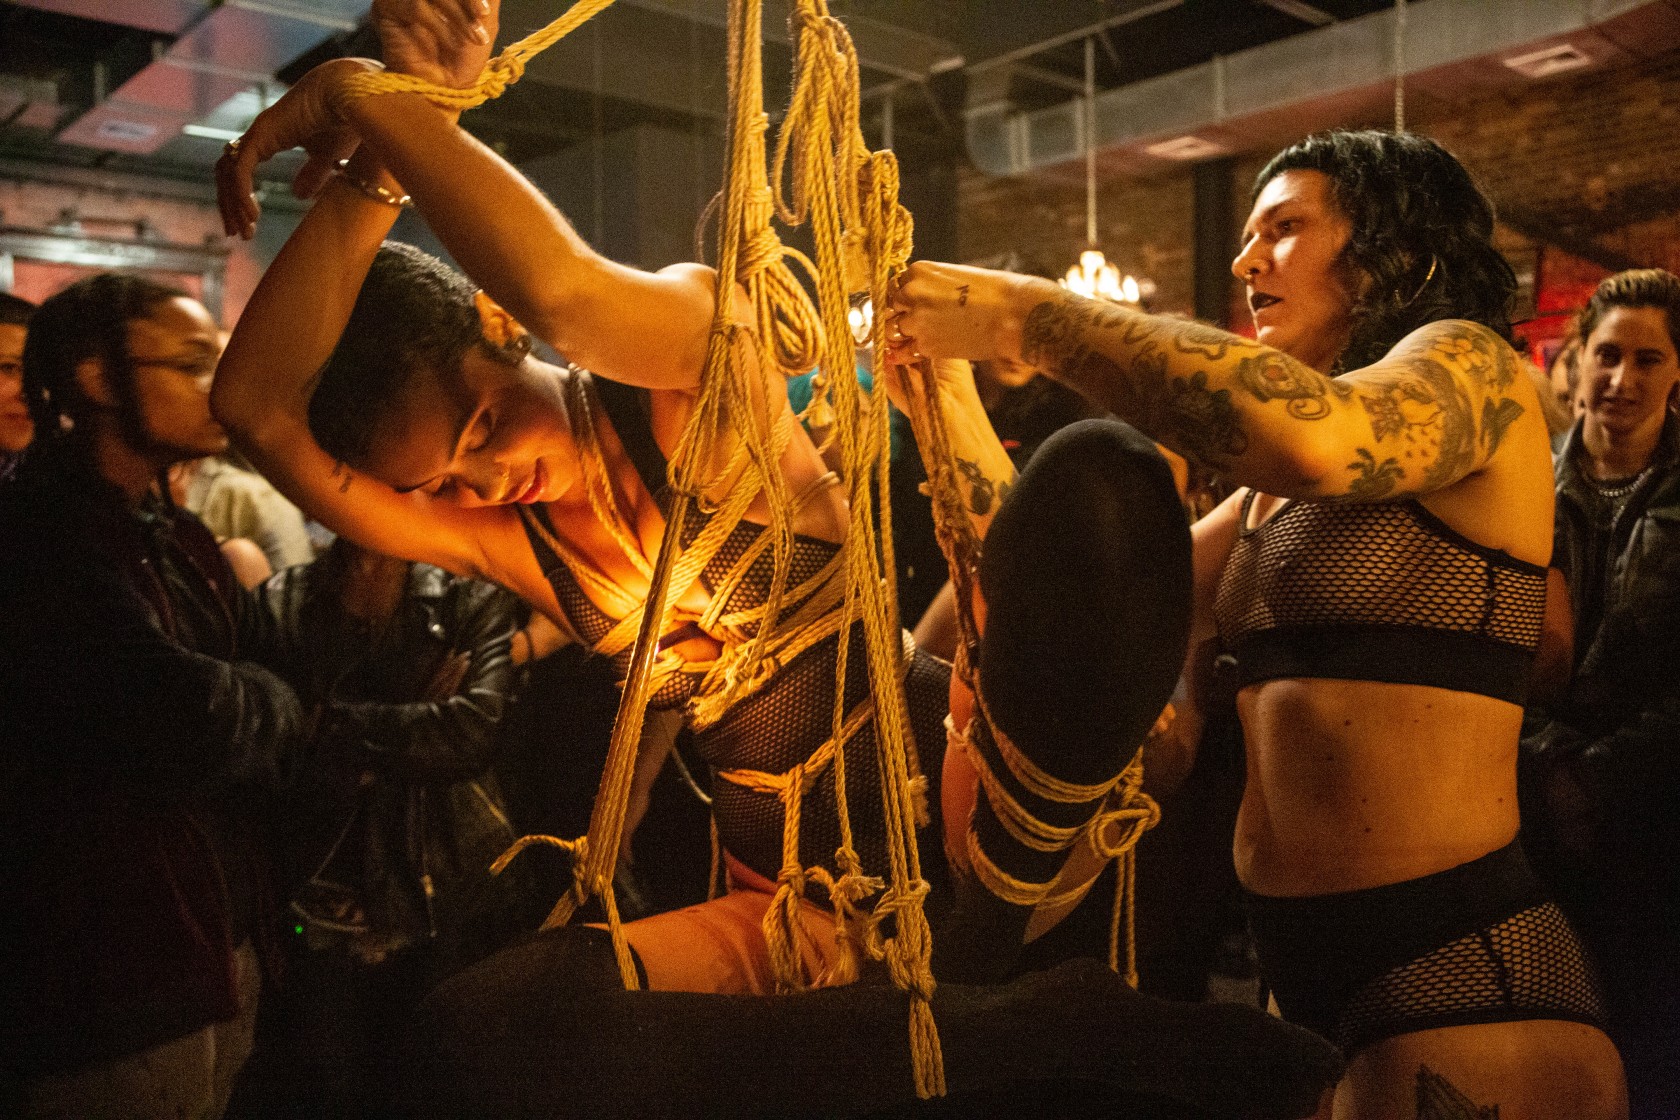 KINK OUT: EPHEMERA Workshop: Bootlacking, Rope, and Impact play